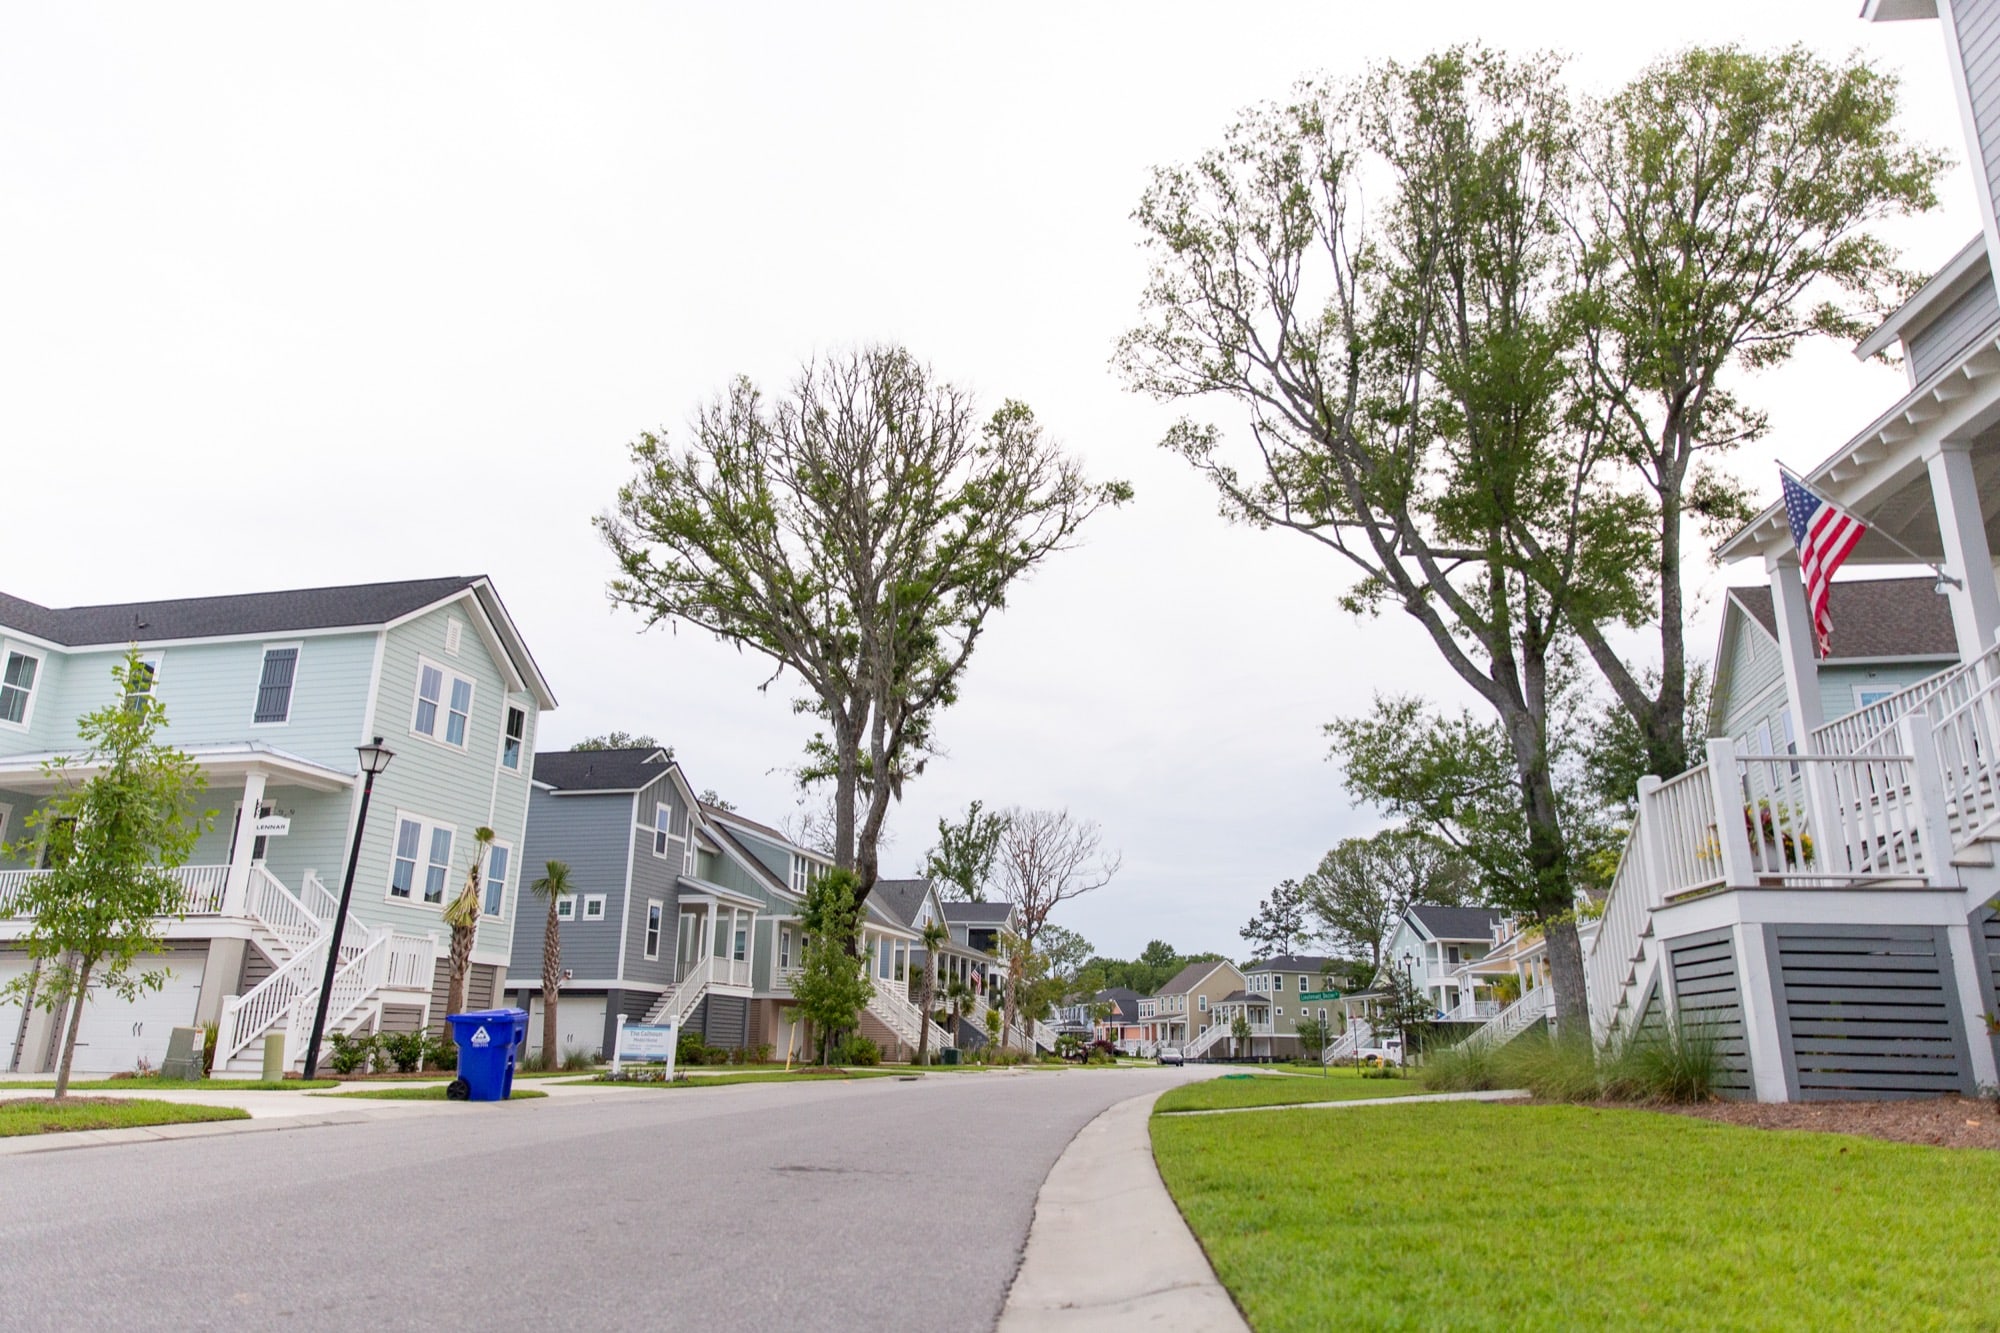 The Stonoview development is one of many in Charleston, South Carolina's fast-growing suburbs that used fill dirt to elevate homes  above the floodplain. (Ellen O'Brien/News21)